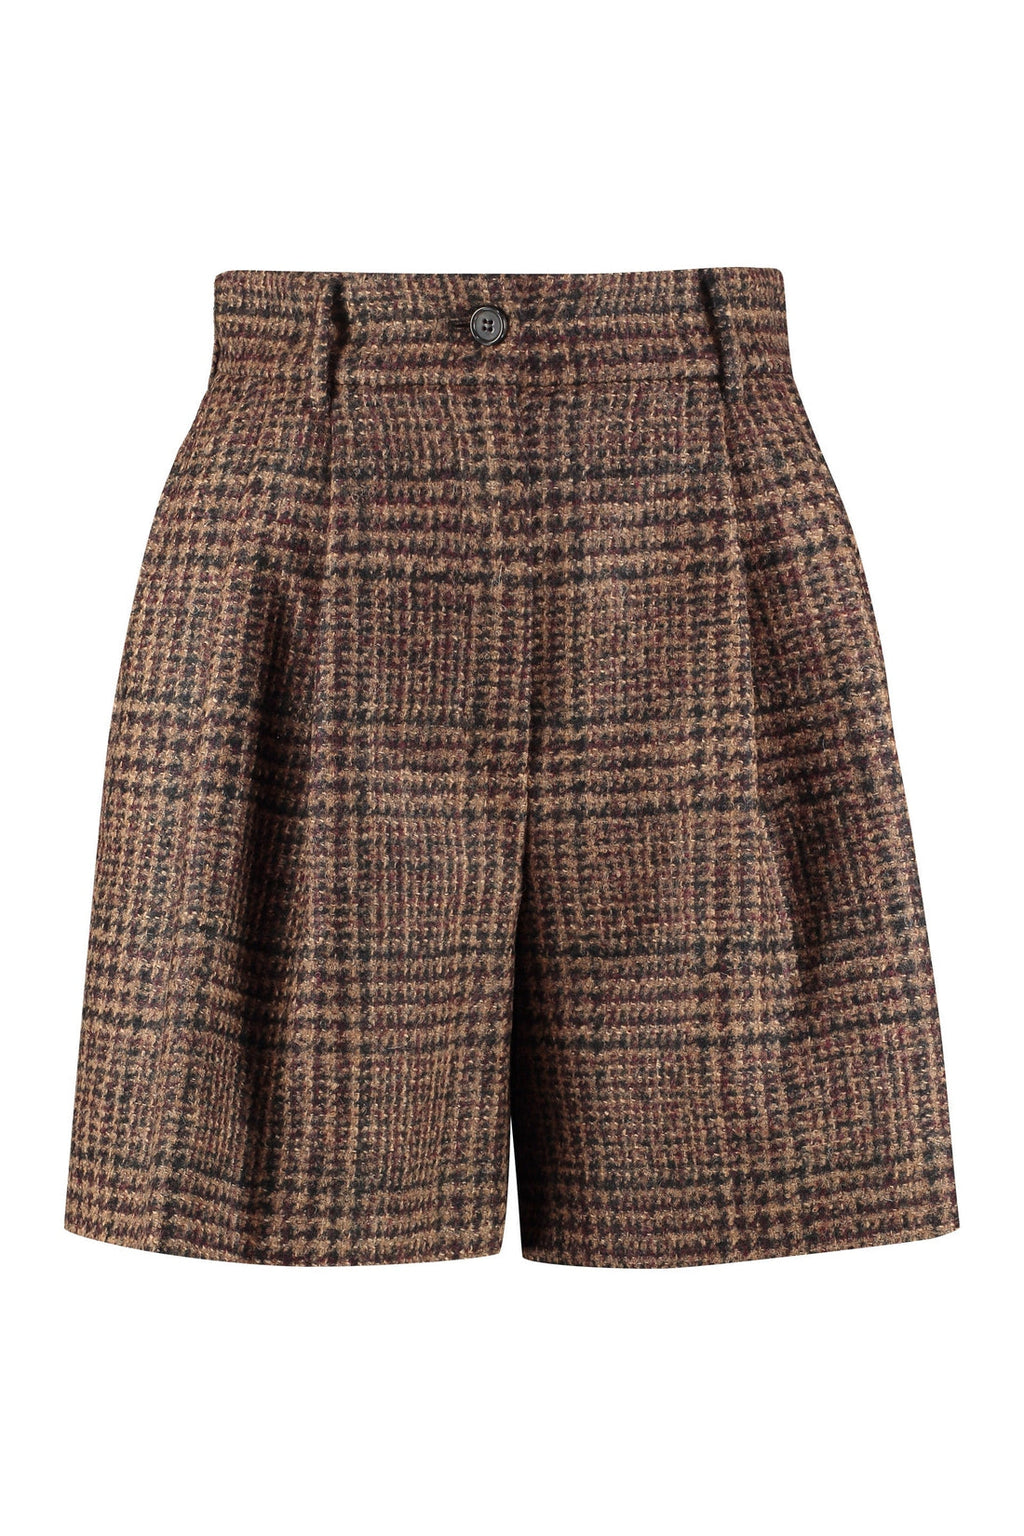 Dolce & Gabbana-OUTLET-SALE-Checked wool shorts-ARCHIVIST